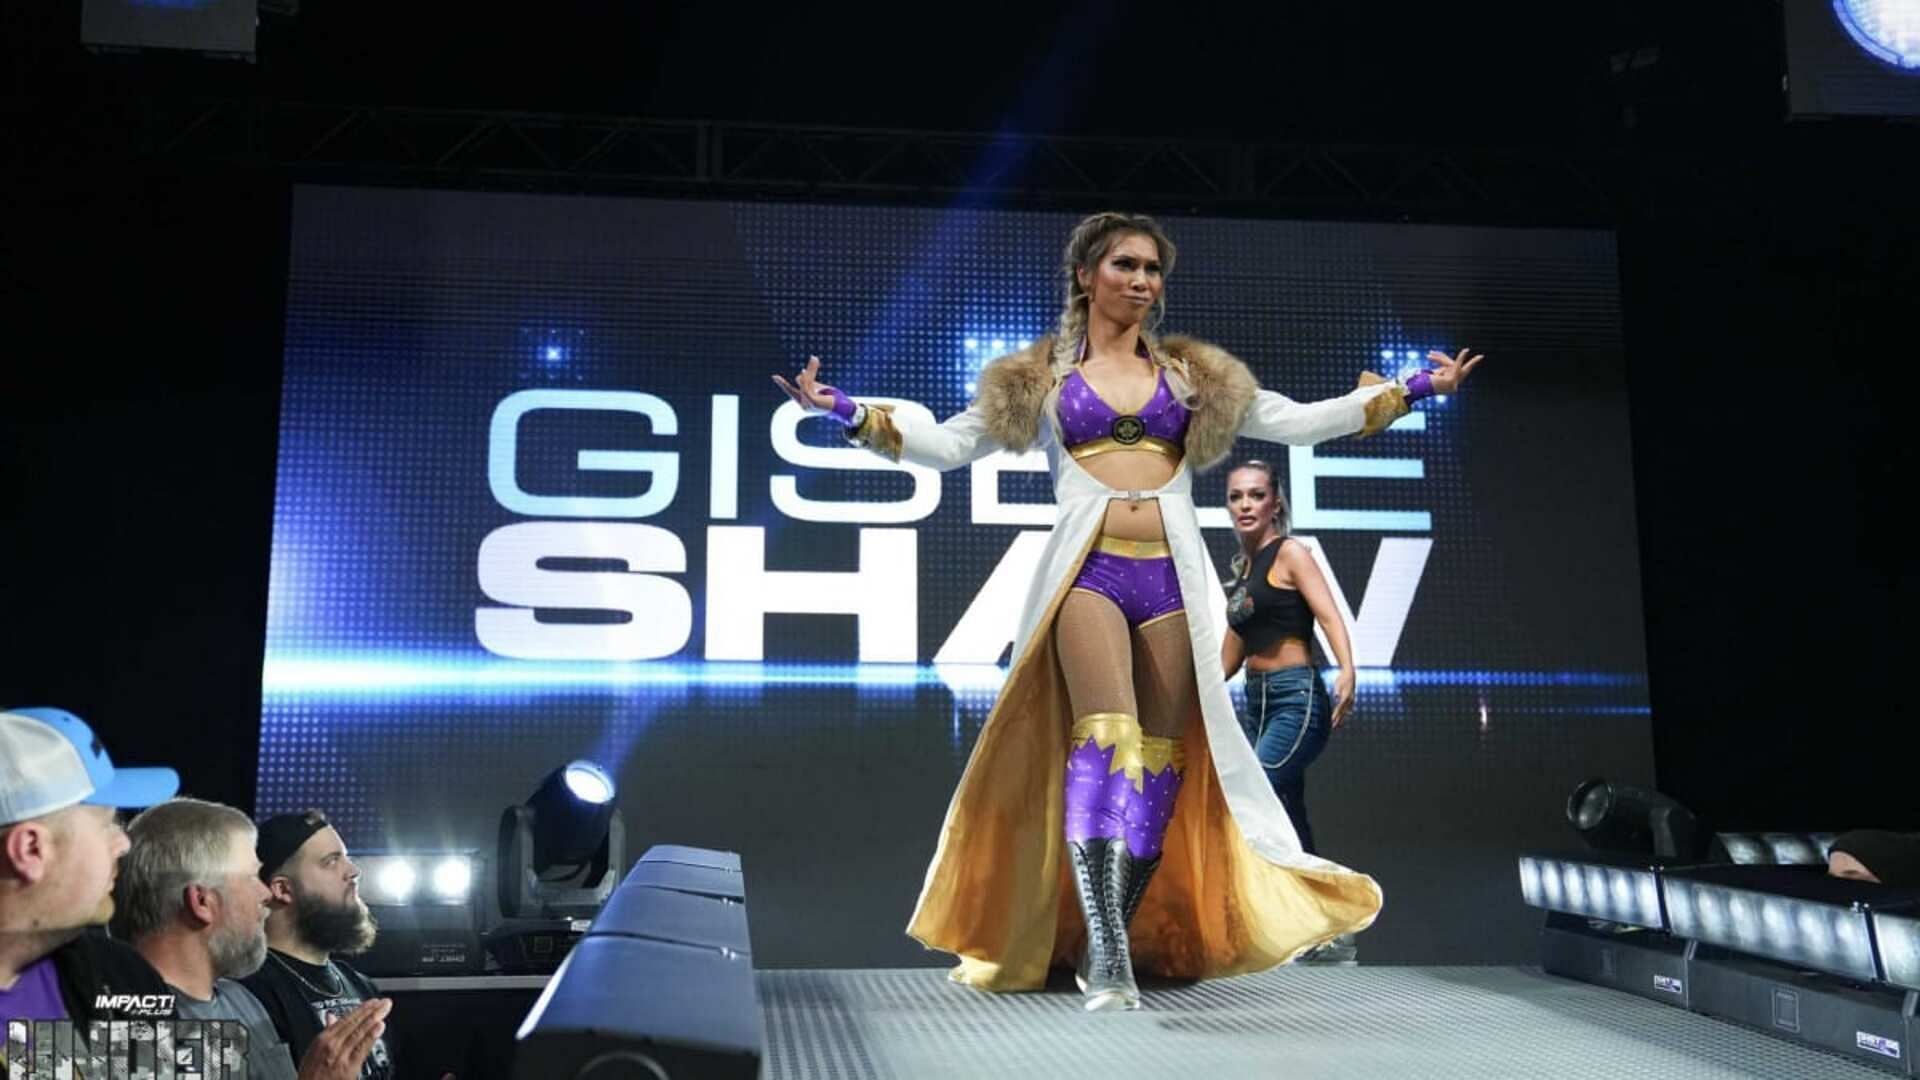 Gisele Shaw will compete against Deonna Purrazzo at No Surrender